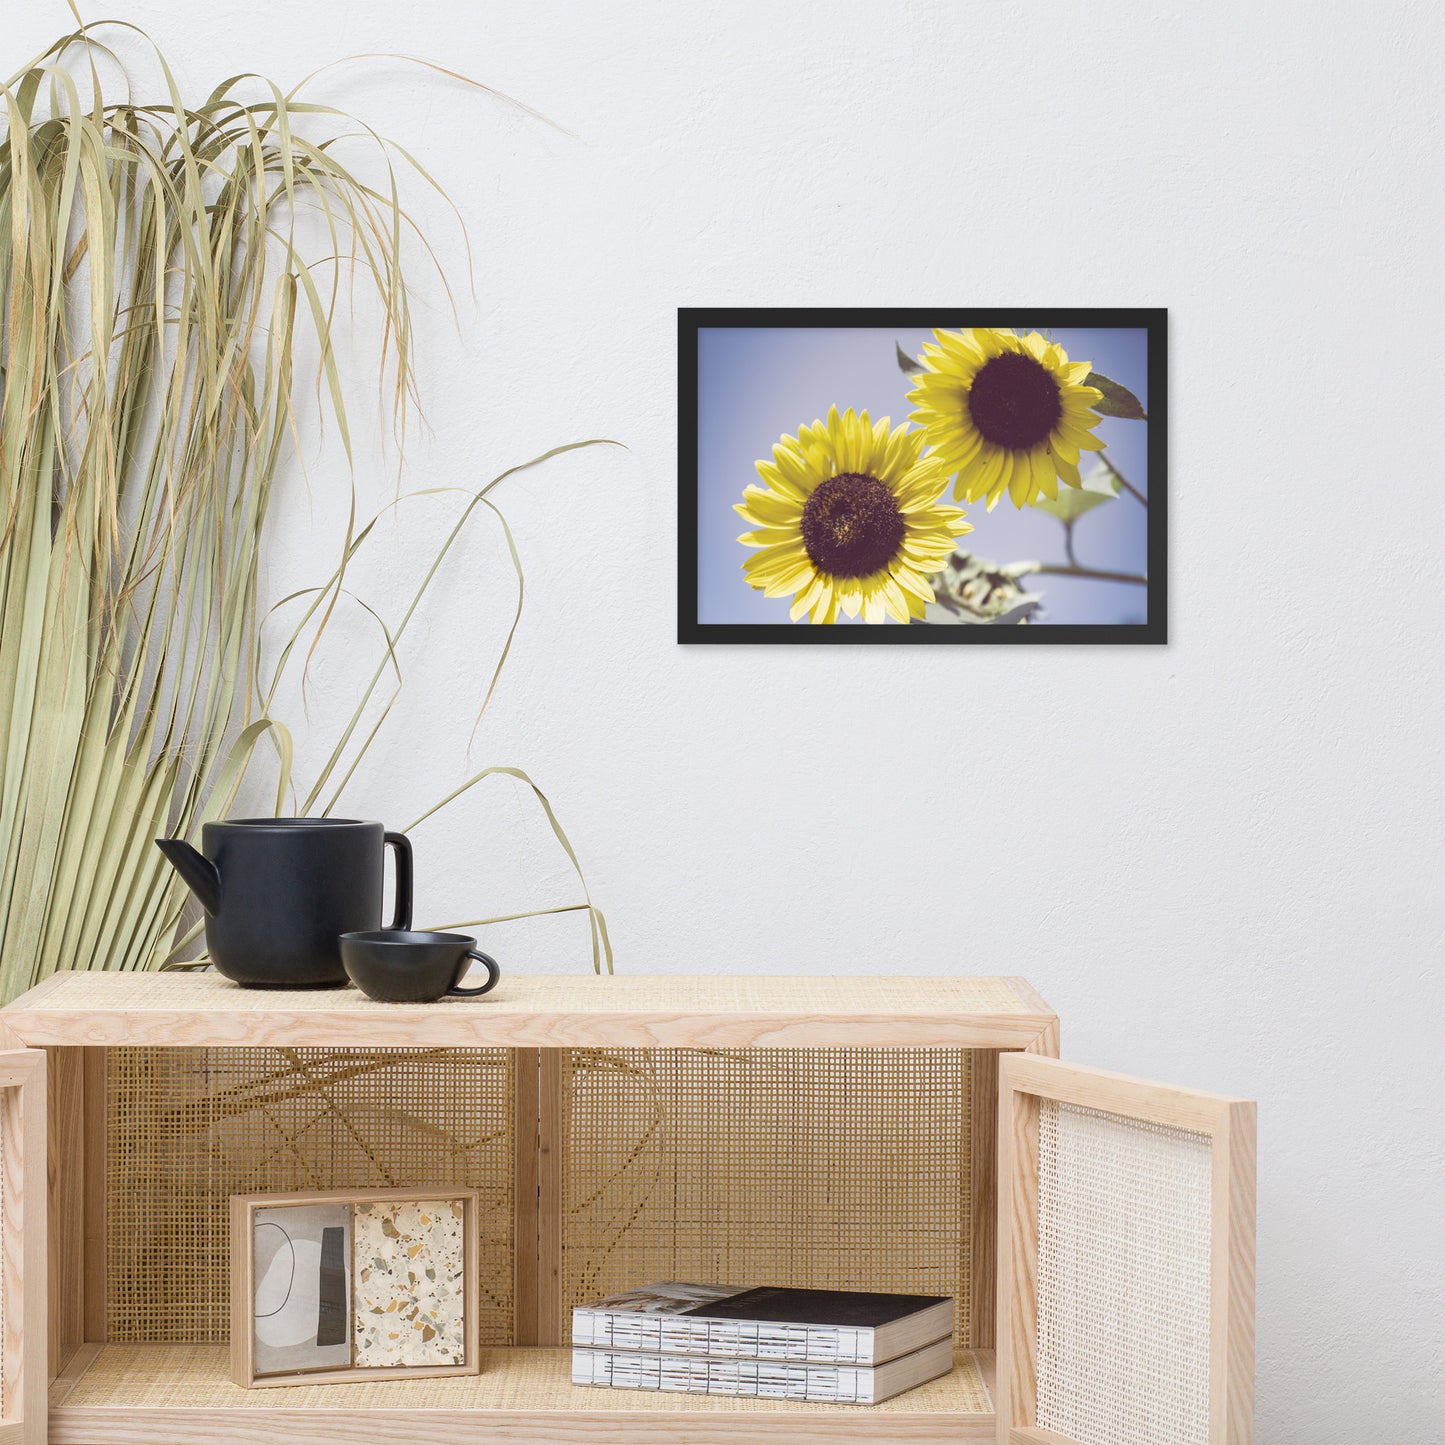 Vintage Flower Prints Framed: Aged Sunflowers Against Sky Abstract / Minimal / Rustic / Country / Farmhouse Style / Floral / Botanical / Nature Photo Framed Wall Art Print - Artwork - Wall Decor - Home Decor